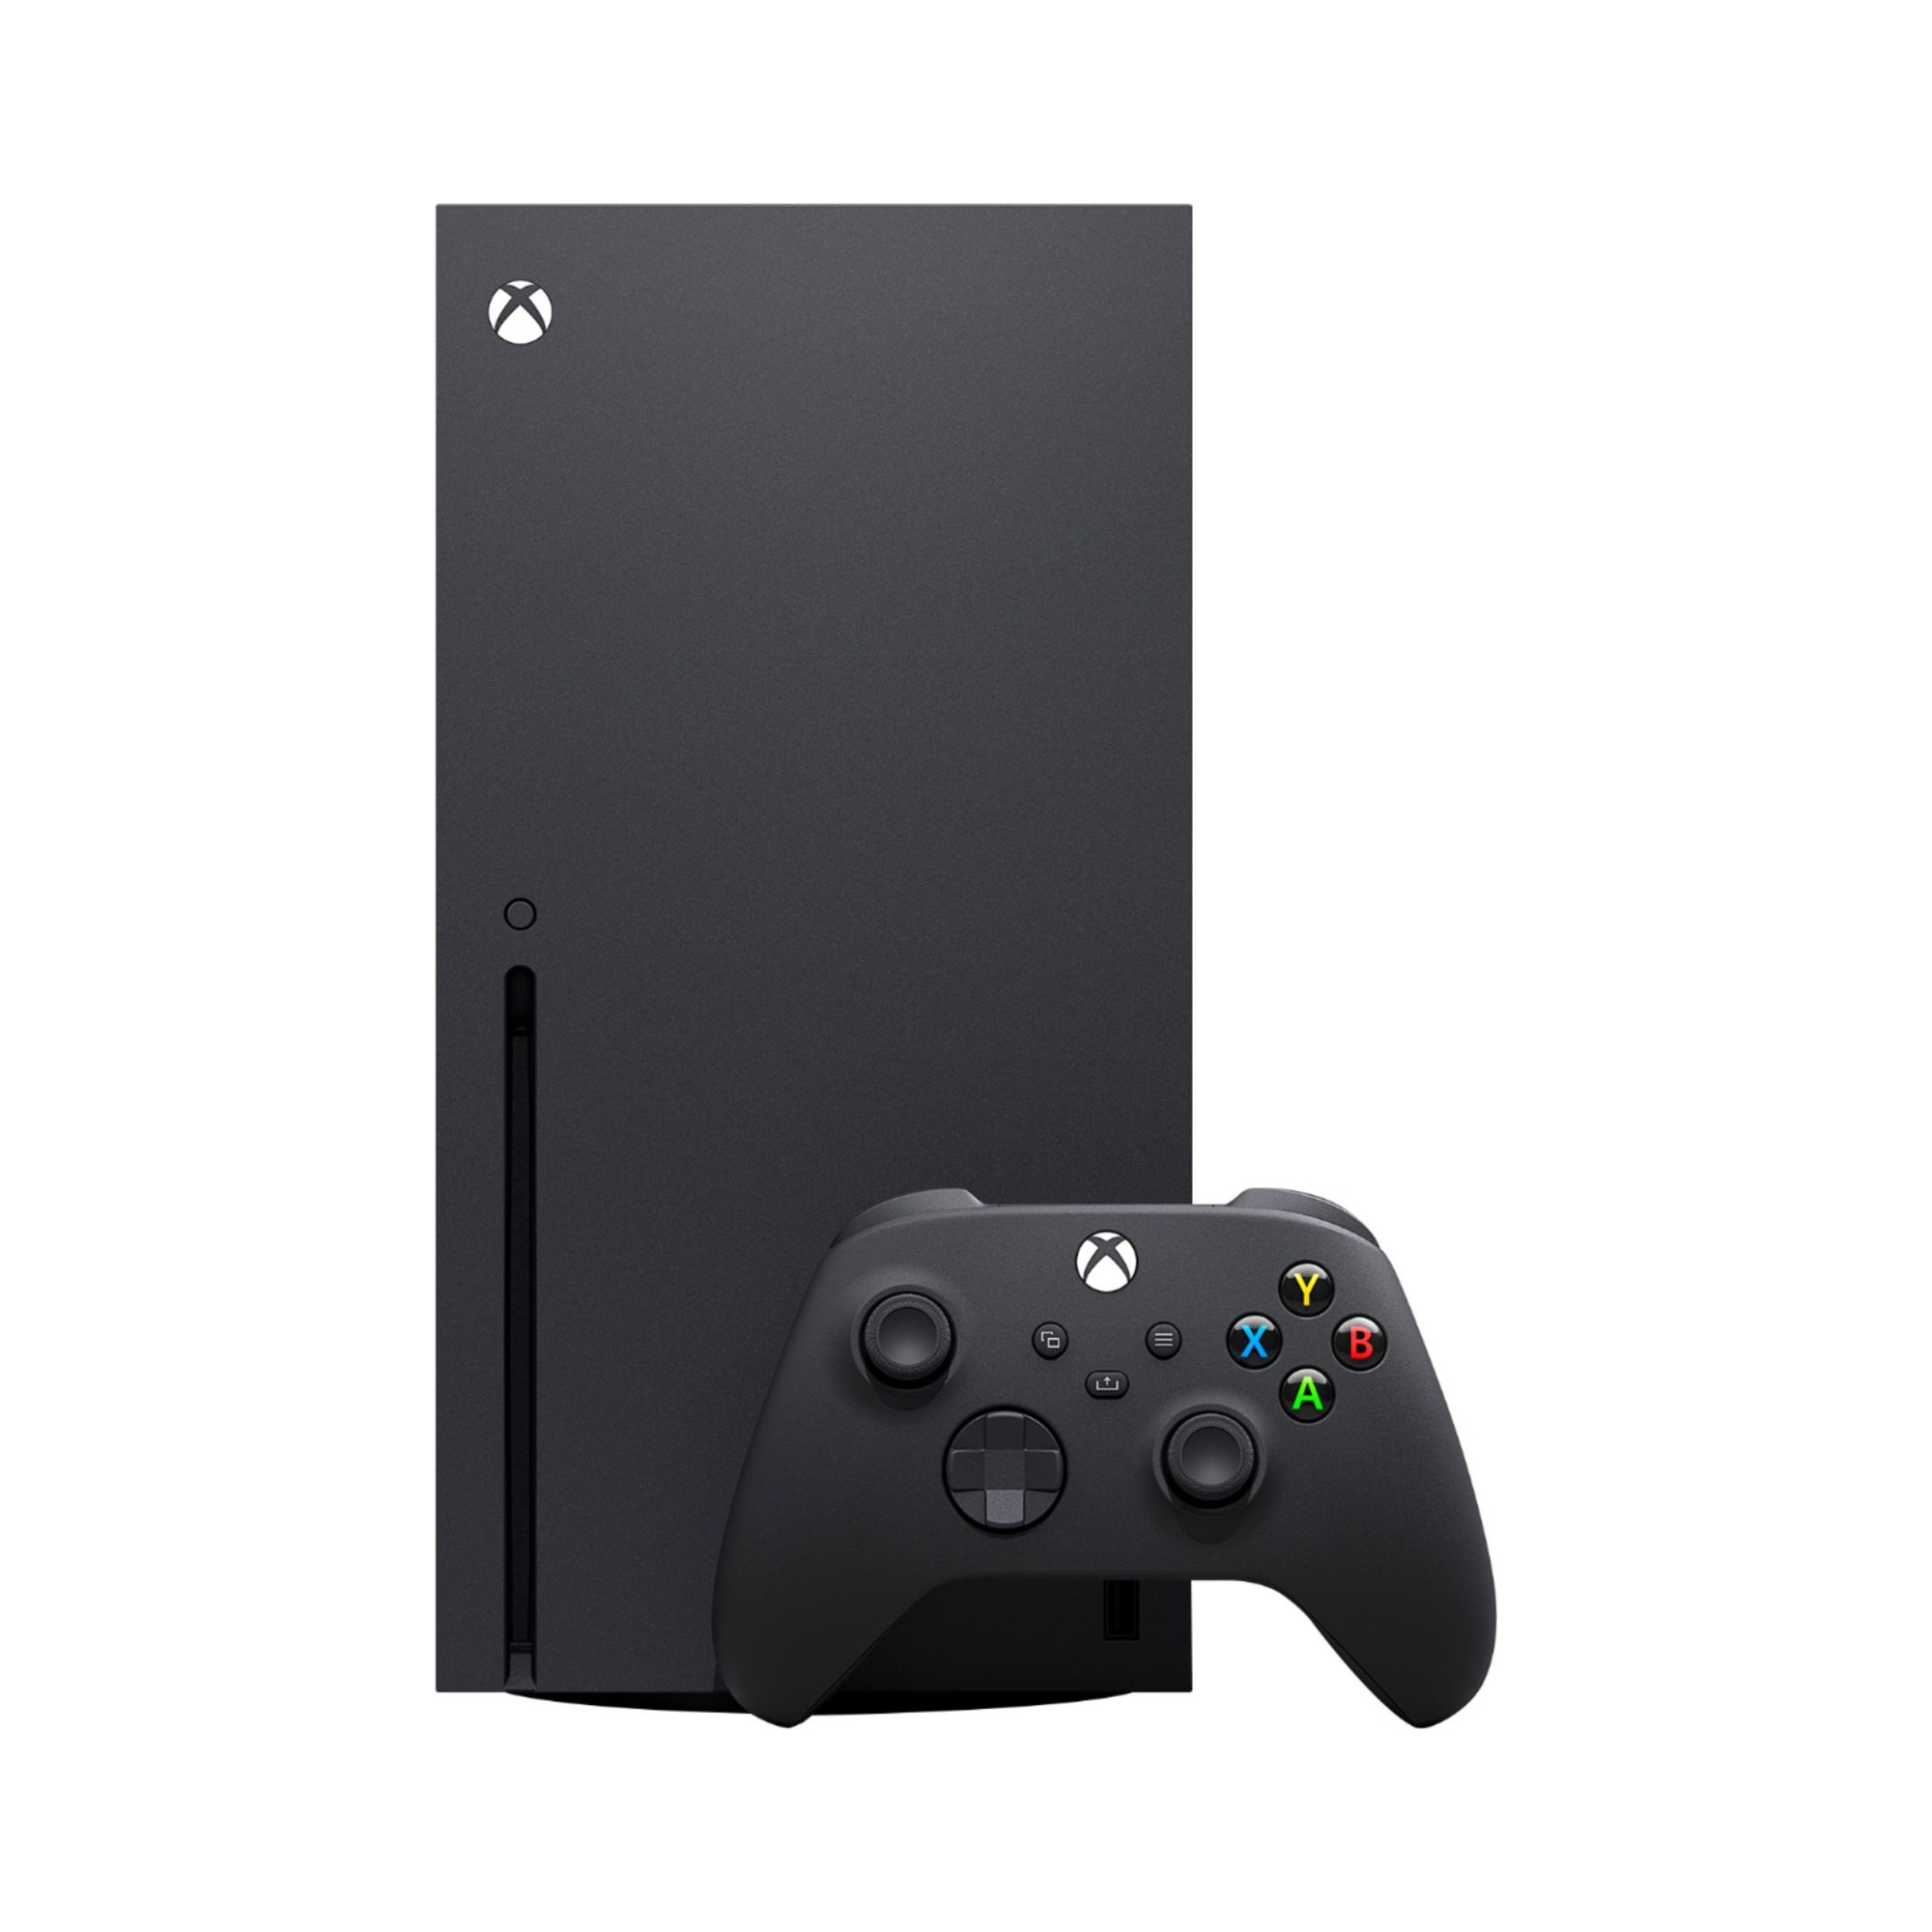 Xbox Series X - New Gen Gaming Console